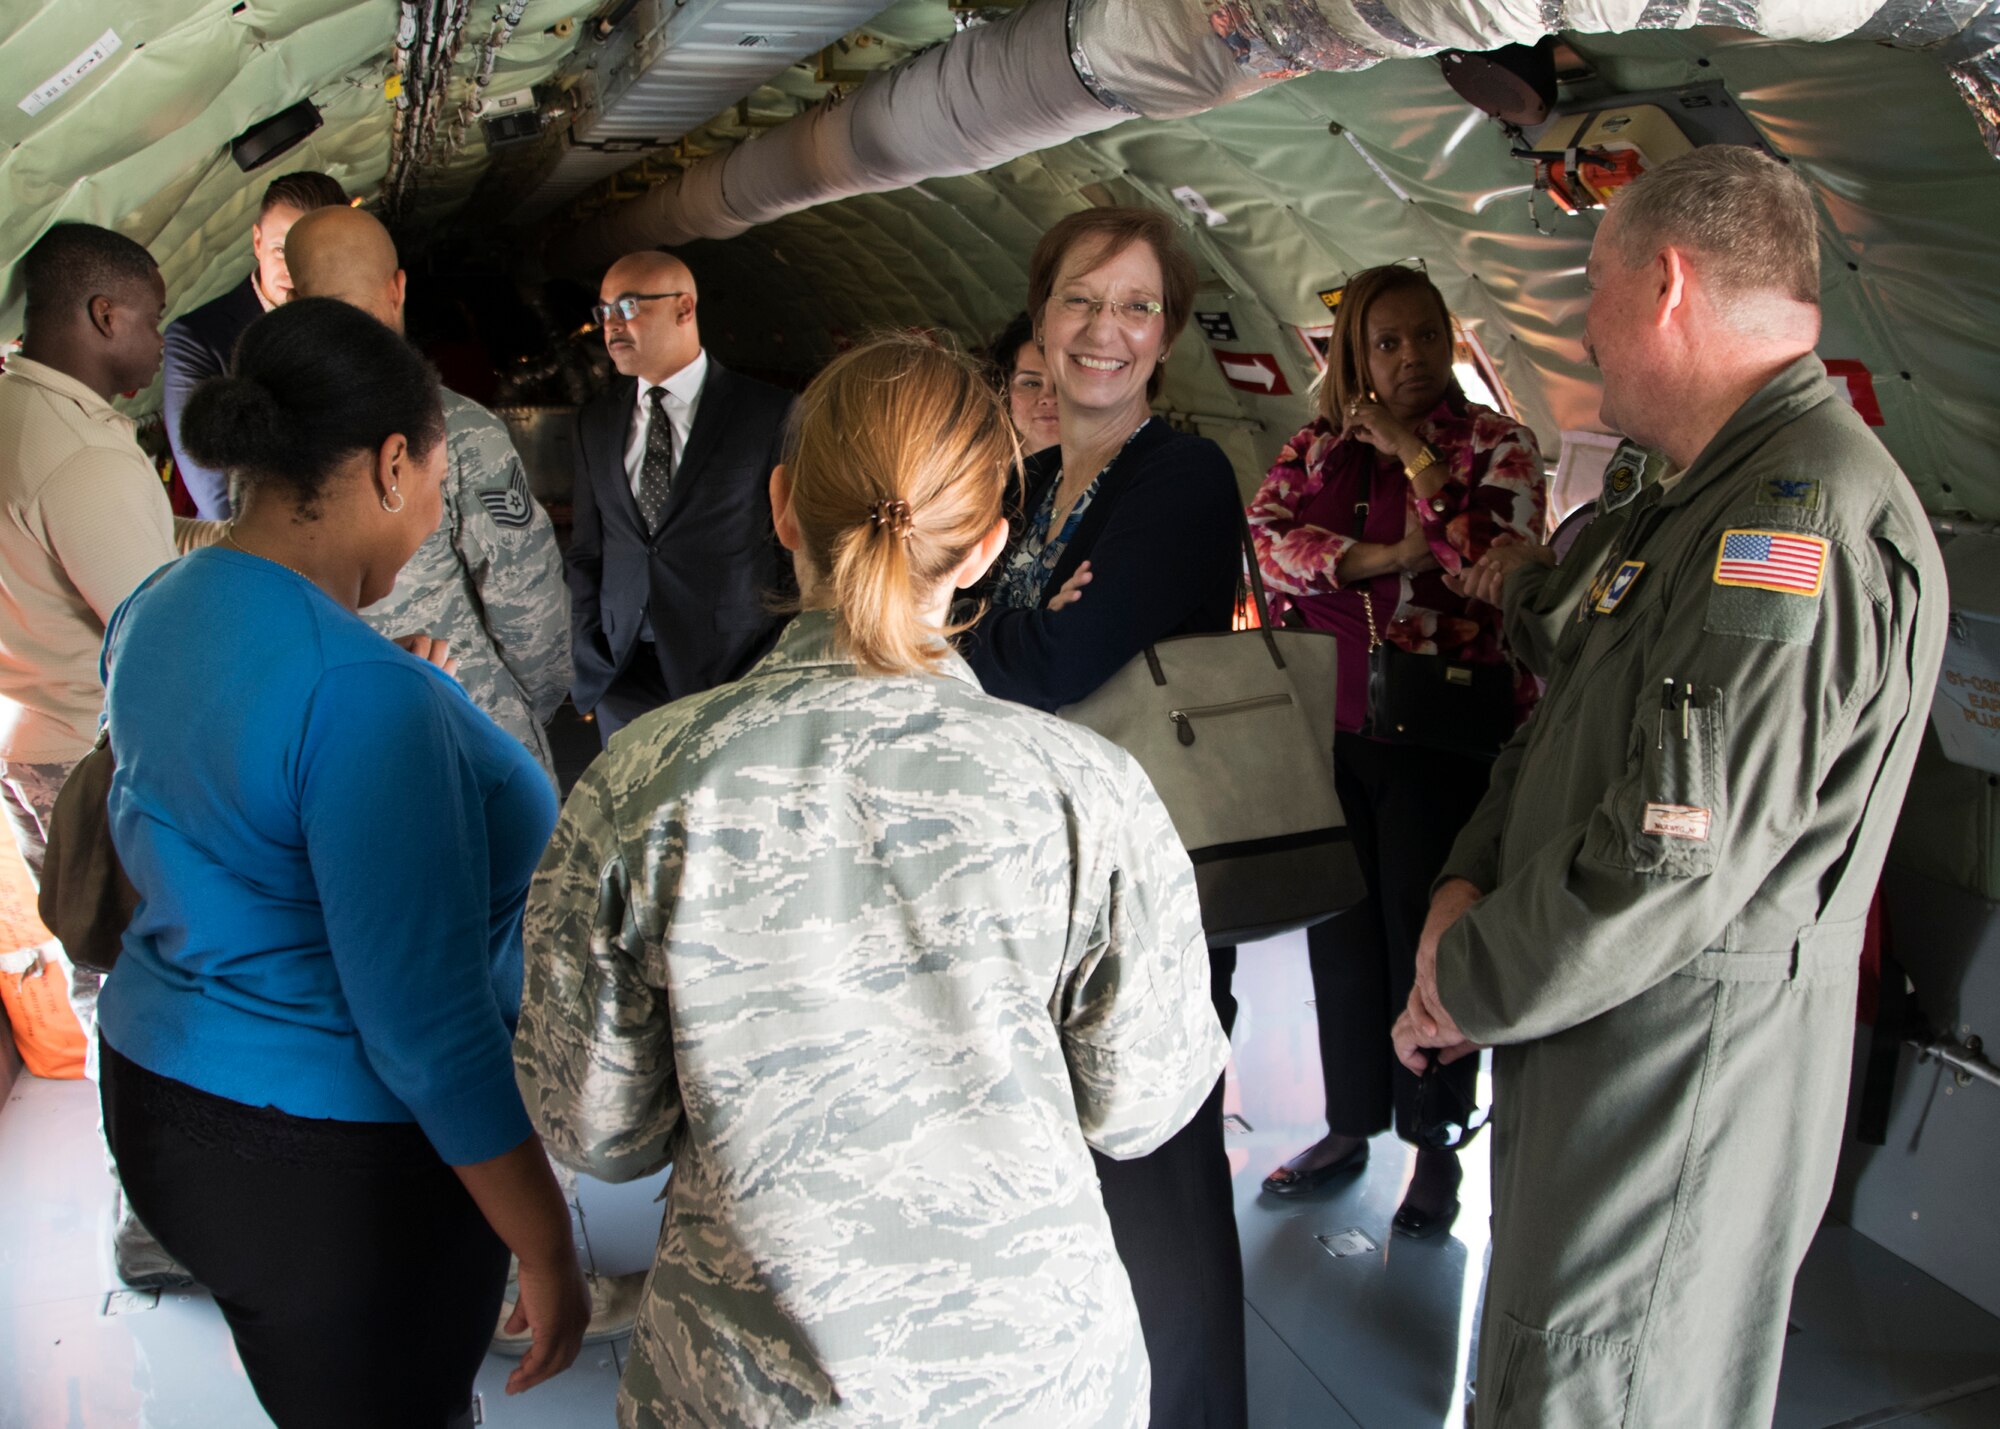 Members of Headquarters Air Force speak with Airmen from the 459th while touring a KC-135 Stratotanker Oct. 7, 2019 on Joint Base Andrews, Md. The team was briefed on the KC-135 and given a tour of the aircraft. (U.S. Air Force photo by Staff Sgt. Cierra Presentado/Released)